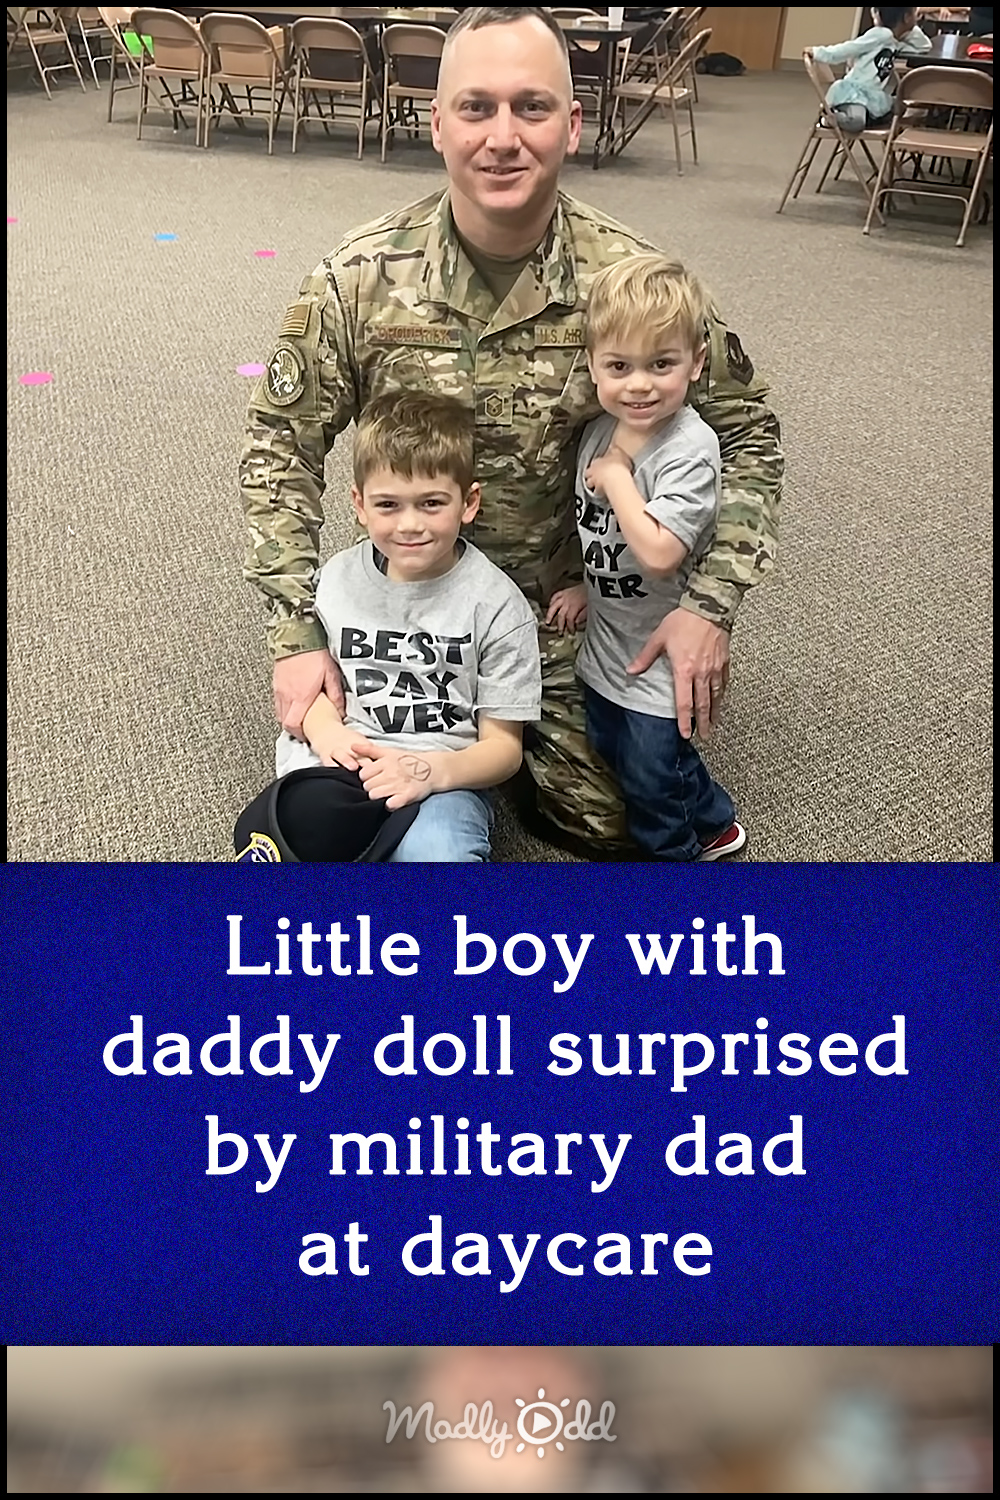 Little boy with daddy doll surprised by military dad at daycare